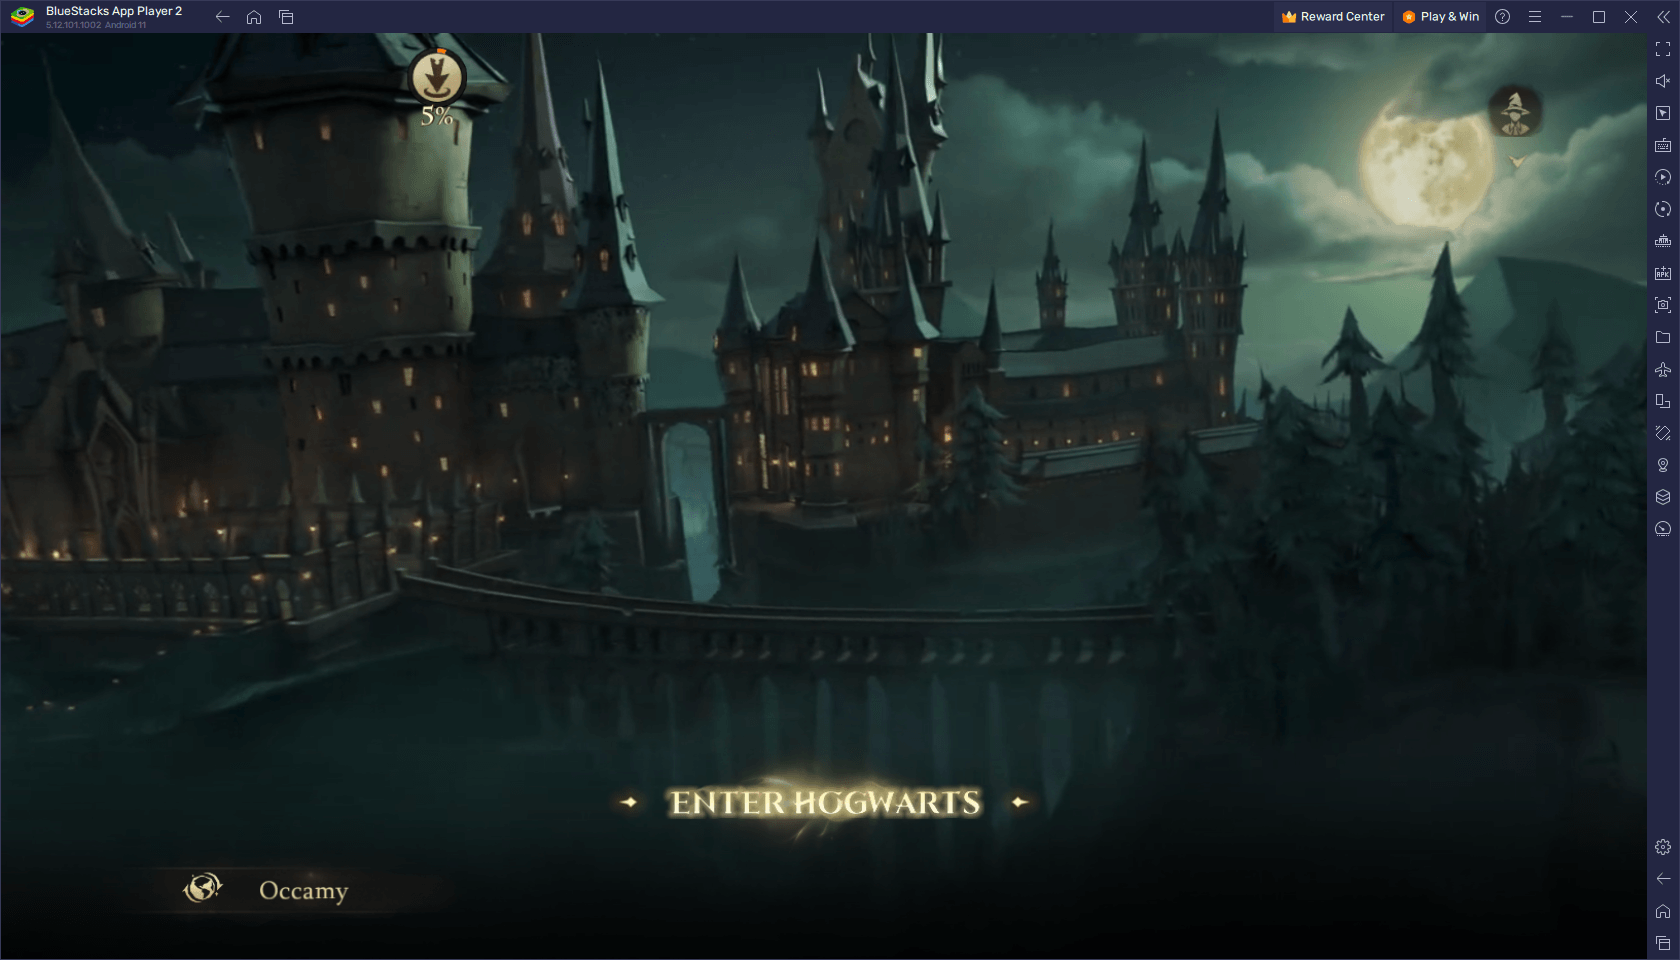 Harry Potter: Magic Awakened Review - A Card-Filled Magical Journey into the Wizarding World